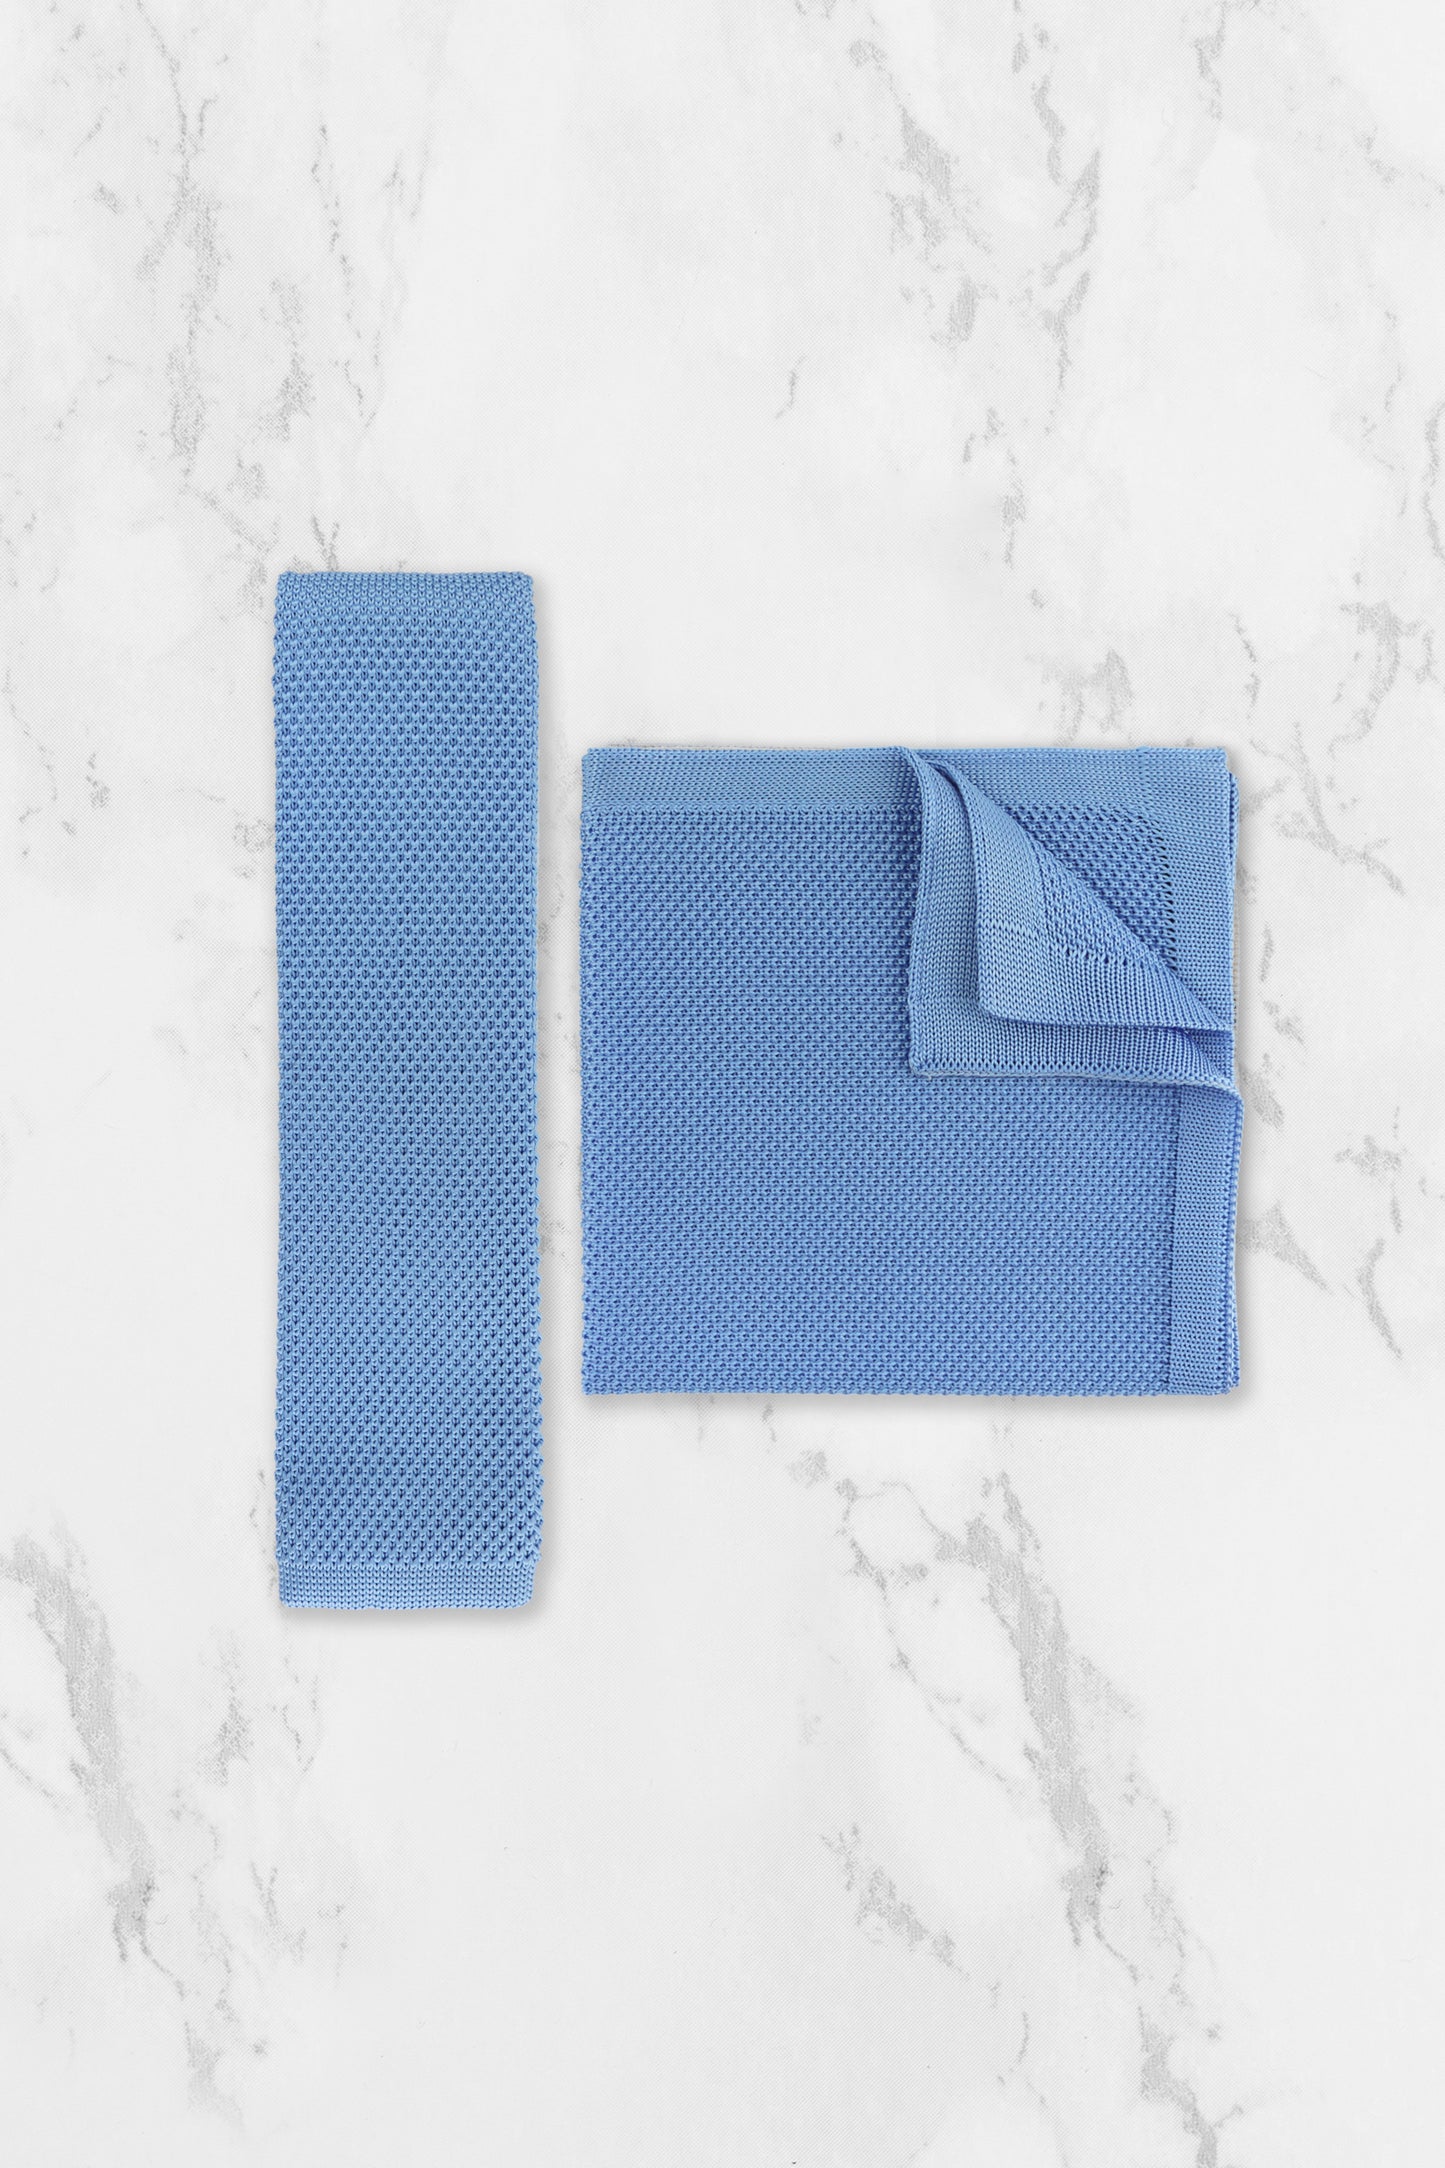 100% Polyester Diamond End Knitted Tie - Light Blue